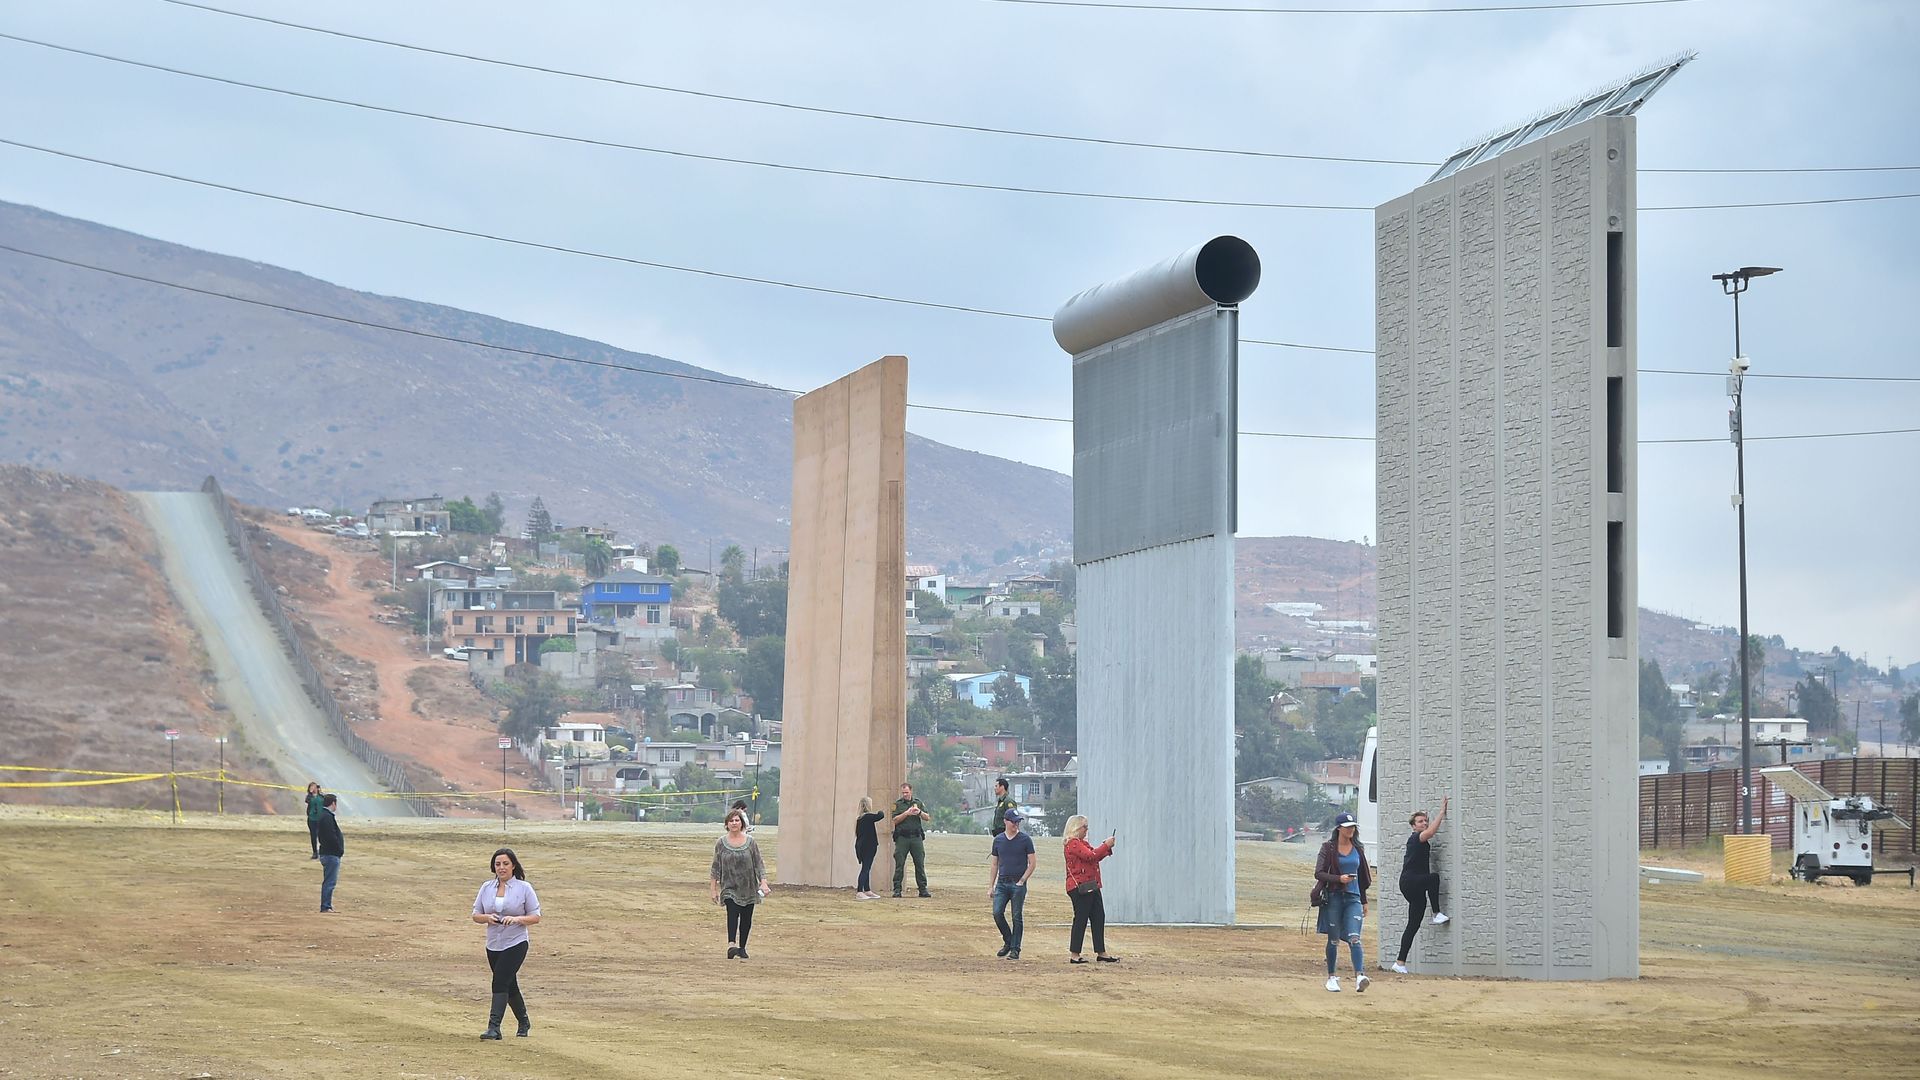 Local city officials visit prototypes of the proposed border wall in San Diego in November. (Frederic J. Brown/AFP/Getty Images)